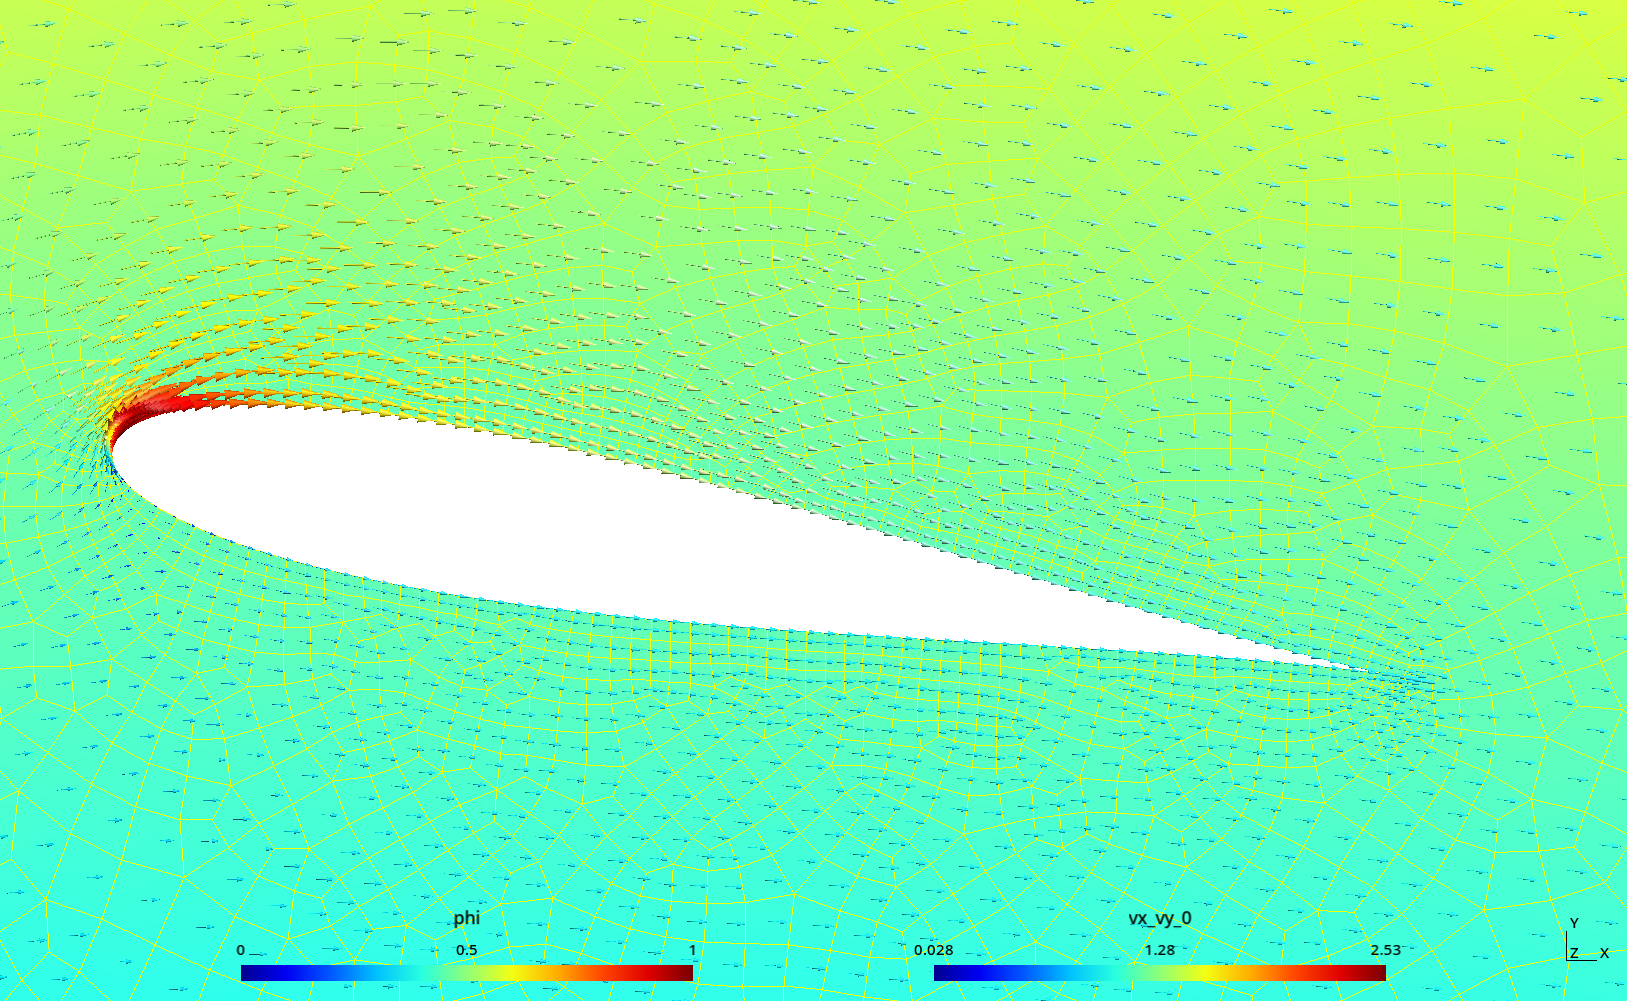 Potential and velocities zoomed over the airfoil